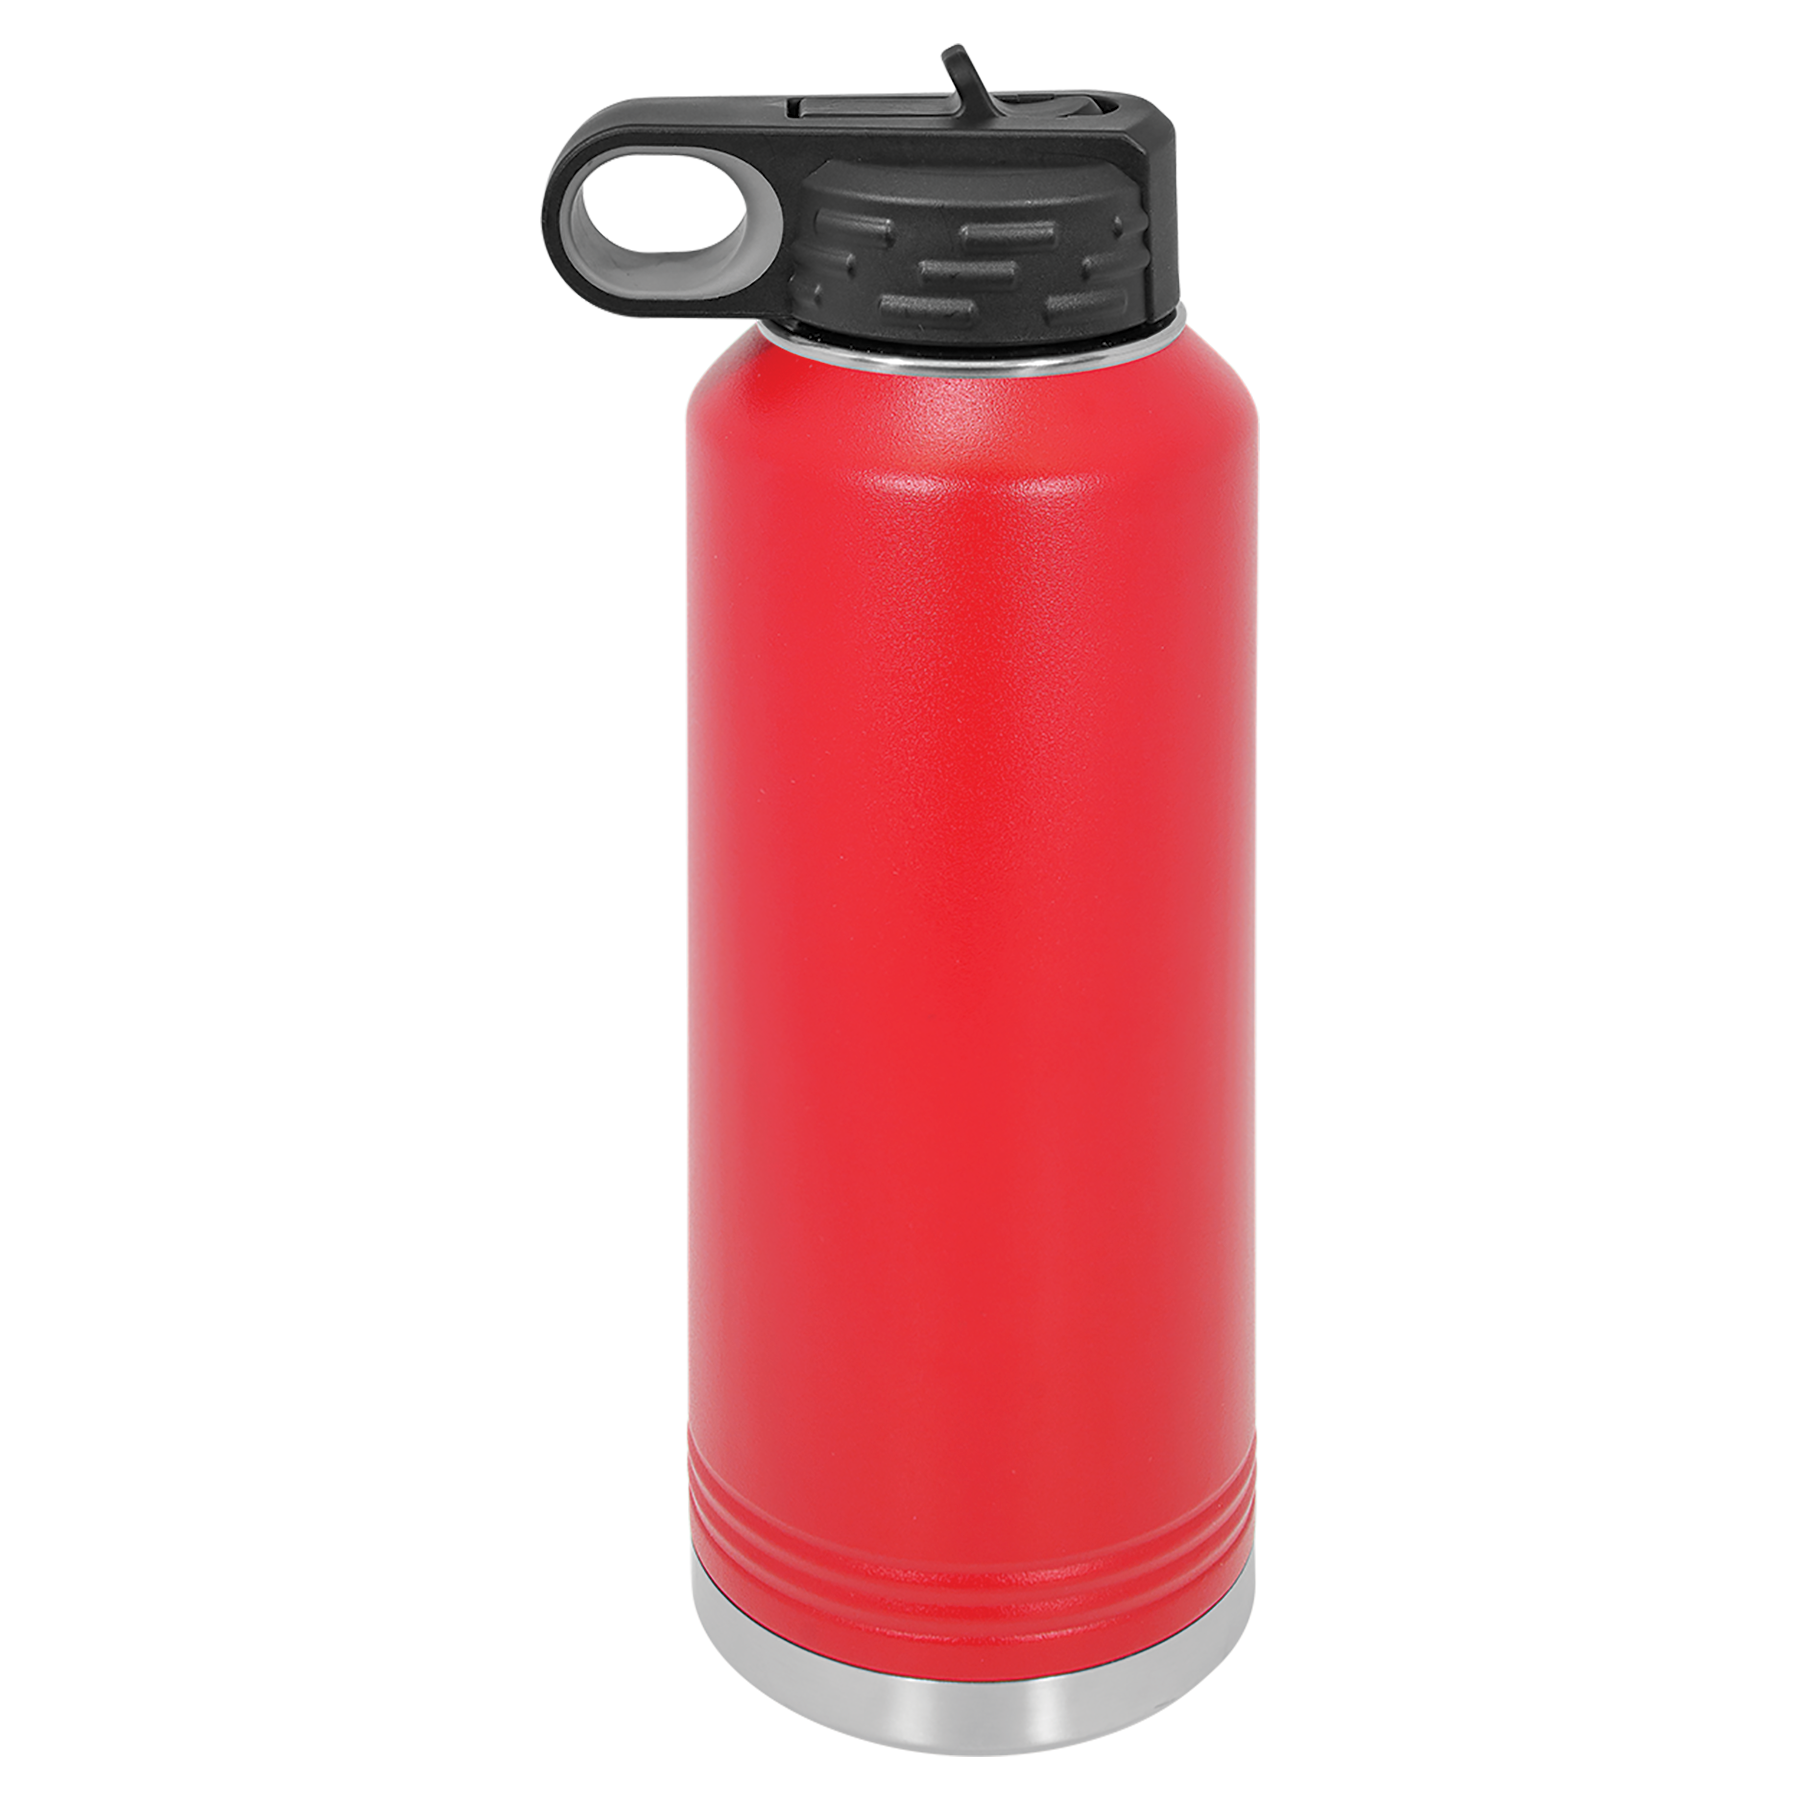 Red 40oz Water Bottle -One Free Engraving -Double-wall Vacuum Insulated -Made from 18/8 Gauge Stainless Steel (Type 304 Food Grade) -Lid is BPA Free (Hand Wash Only) -Not recommended for Dishwasher -Works with Cold and Hot Drinks -18 Color Options -Perfect for Personalized Gifts, Awards, Incentives, Swag & Fundraisers